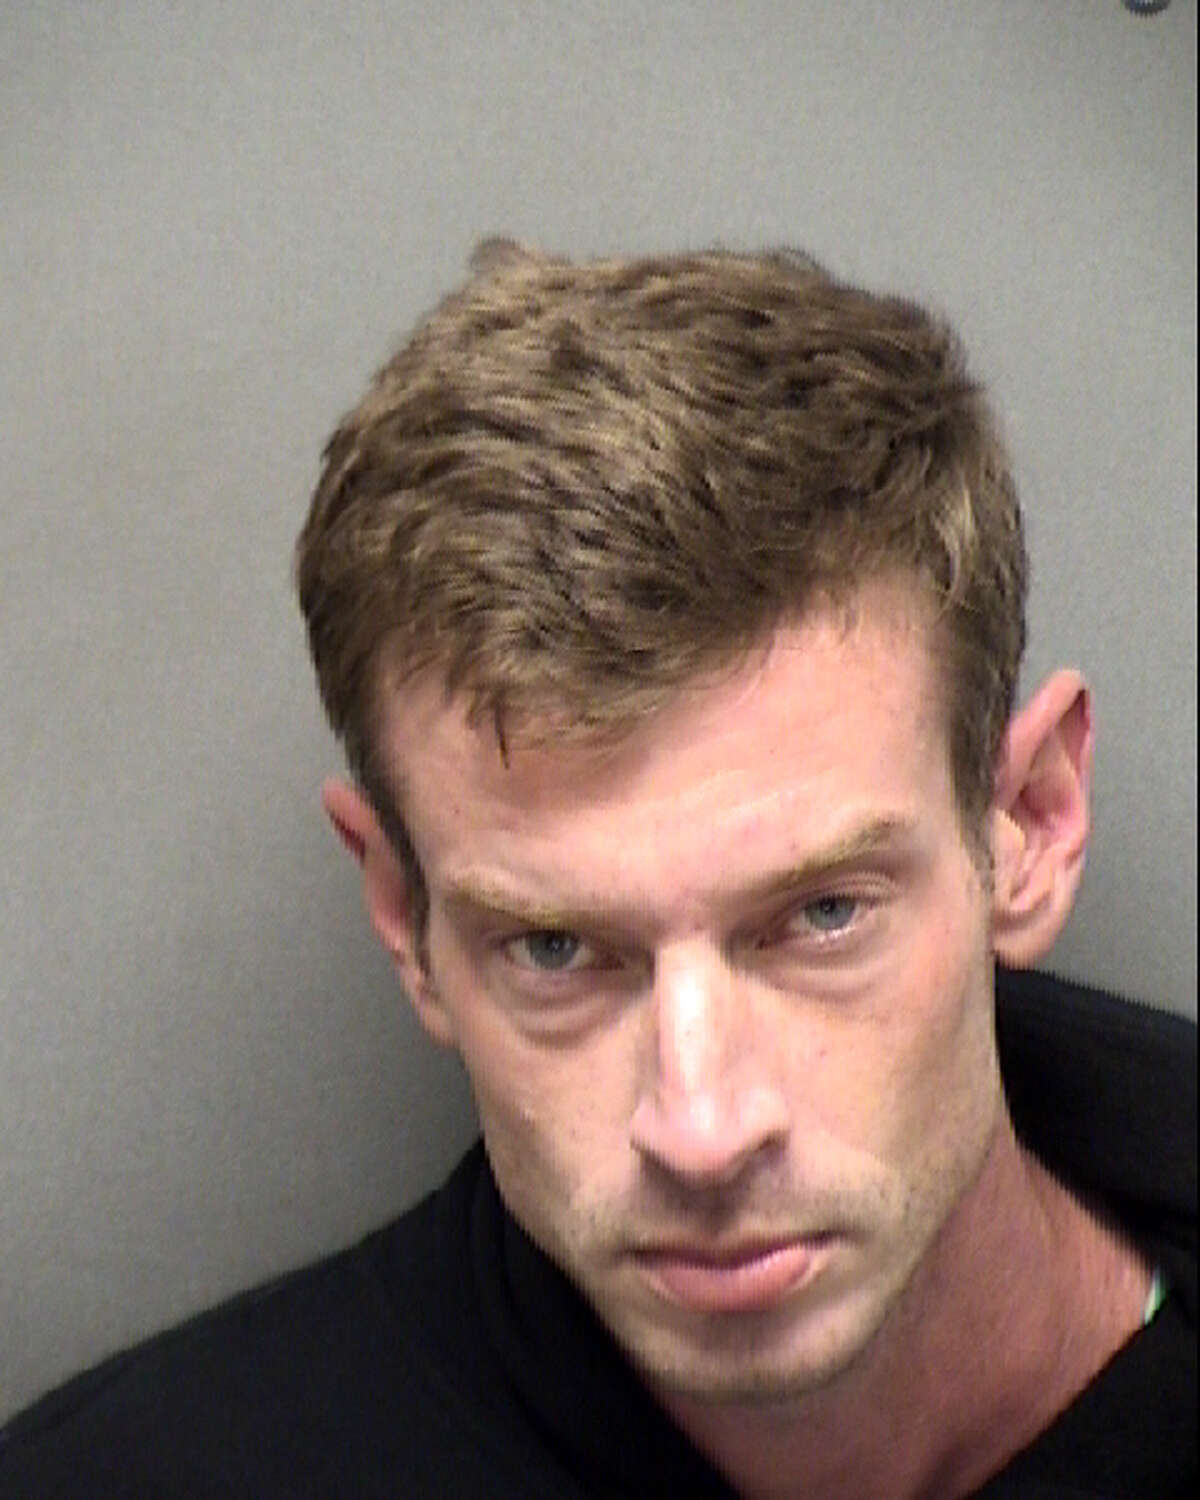 Christopher Thomas Norton, 35, was charged with failure to stop and render aid resulting in death.